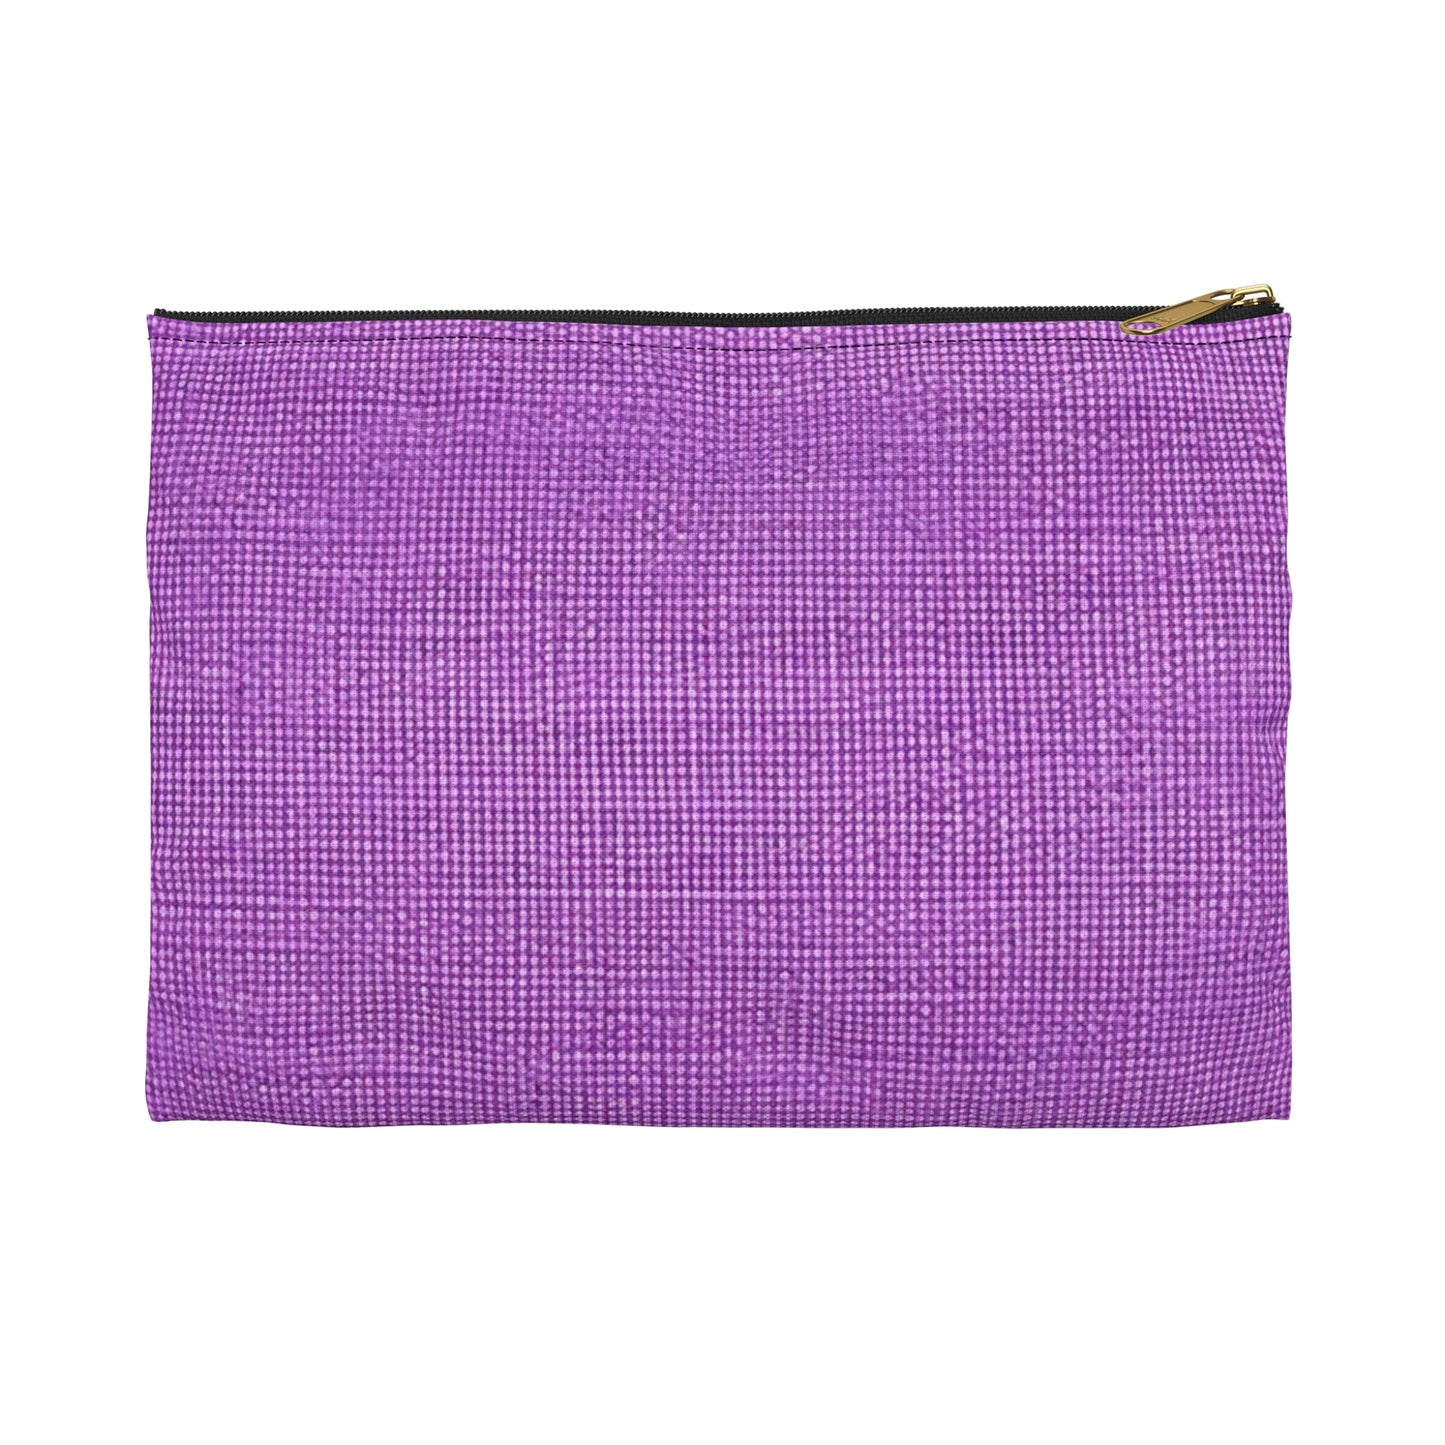 Hyper Iris Orchid Red: Denim-Inspired, Bold Style - Accessory Pouch